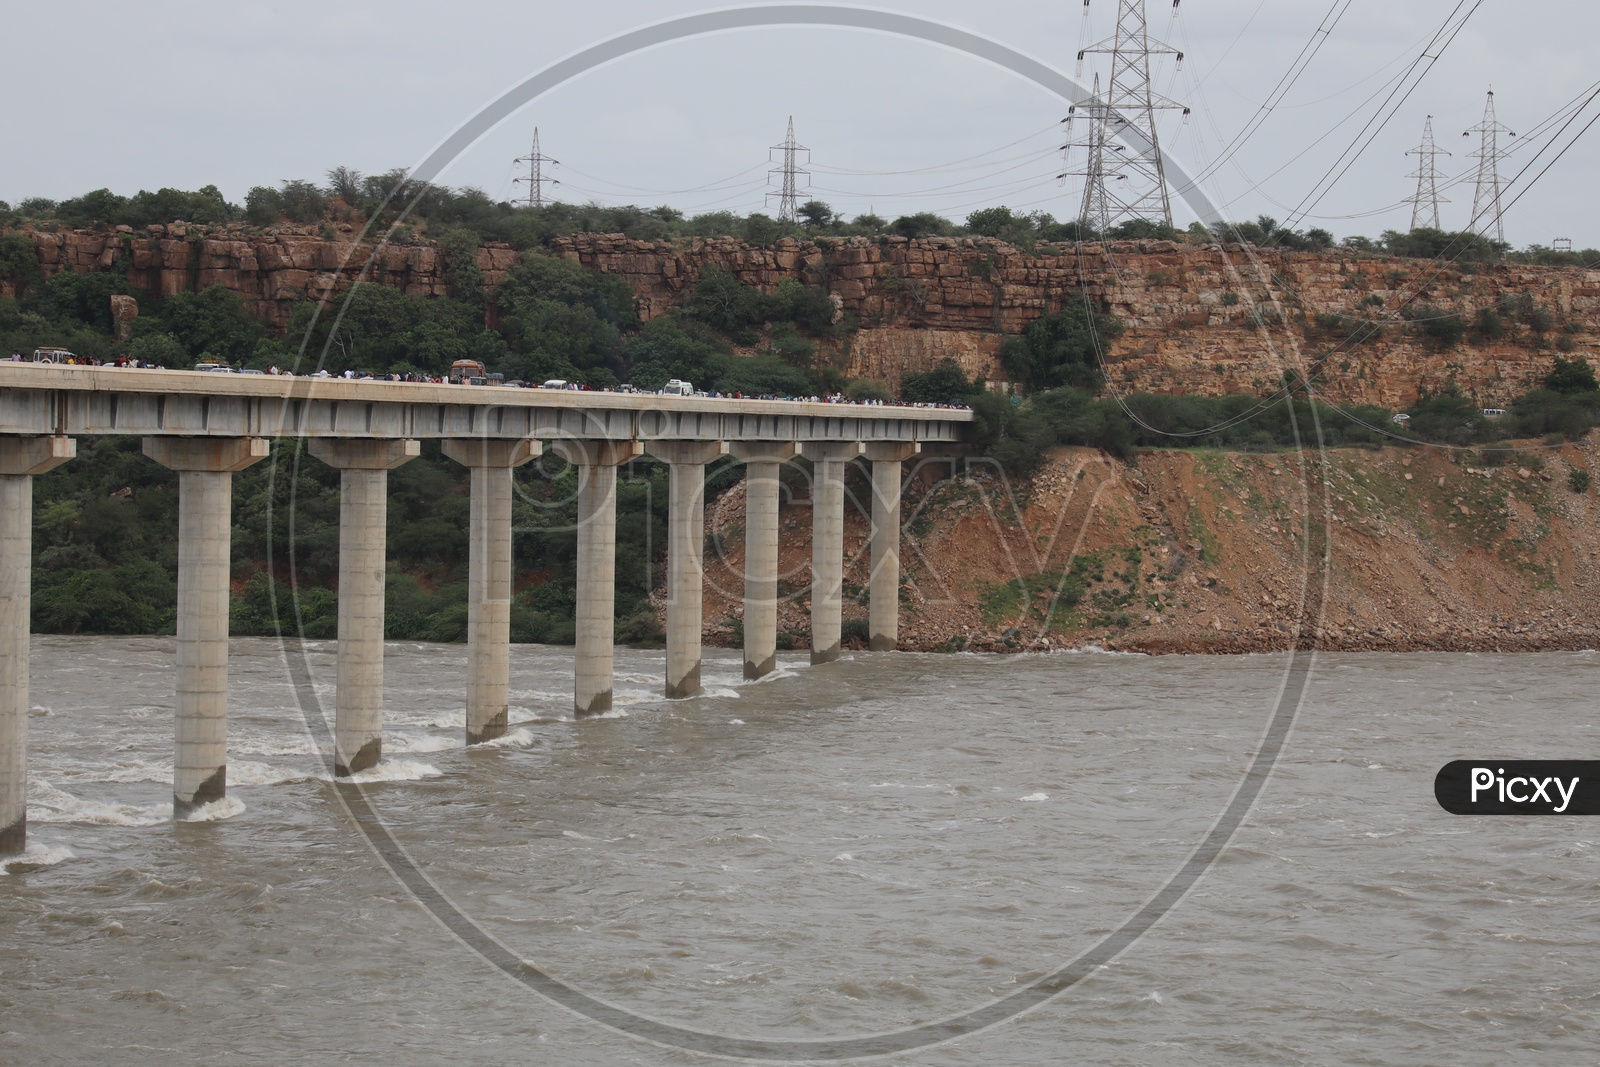 Heavy Currents Striking The Bridge Pillars Due to Heavy Flood Of Water